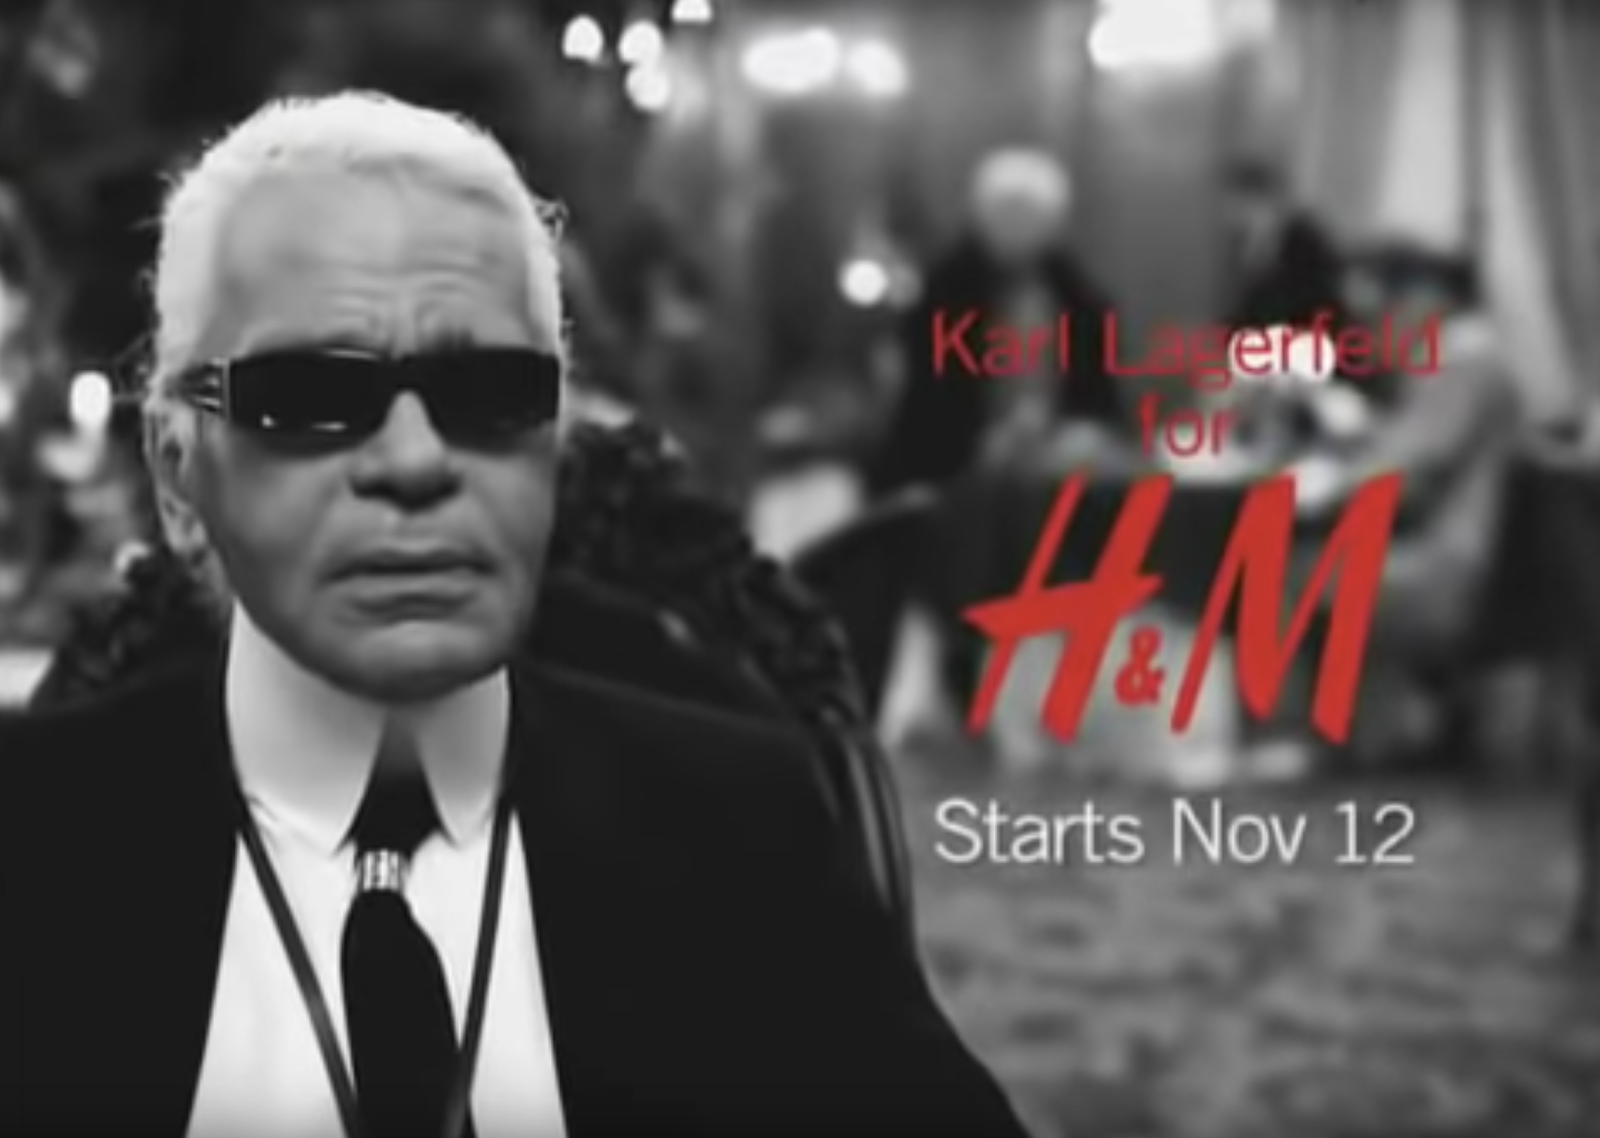 Pin by Bénédicte Morin on Direction Art | H&m commercial, Karl lagerfeld,  Lagerfeld